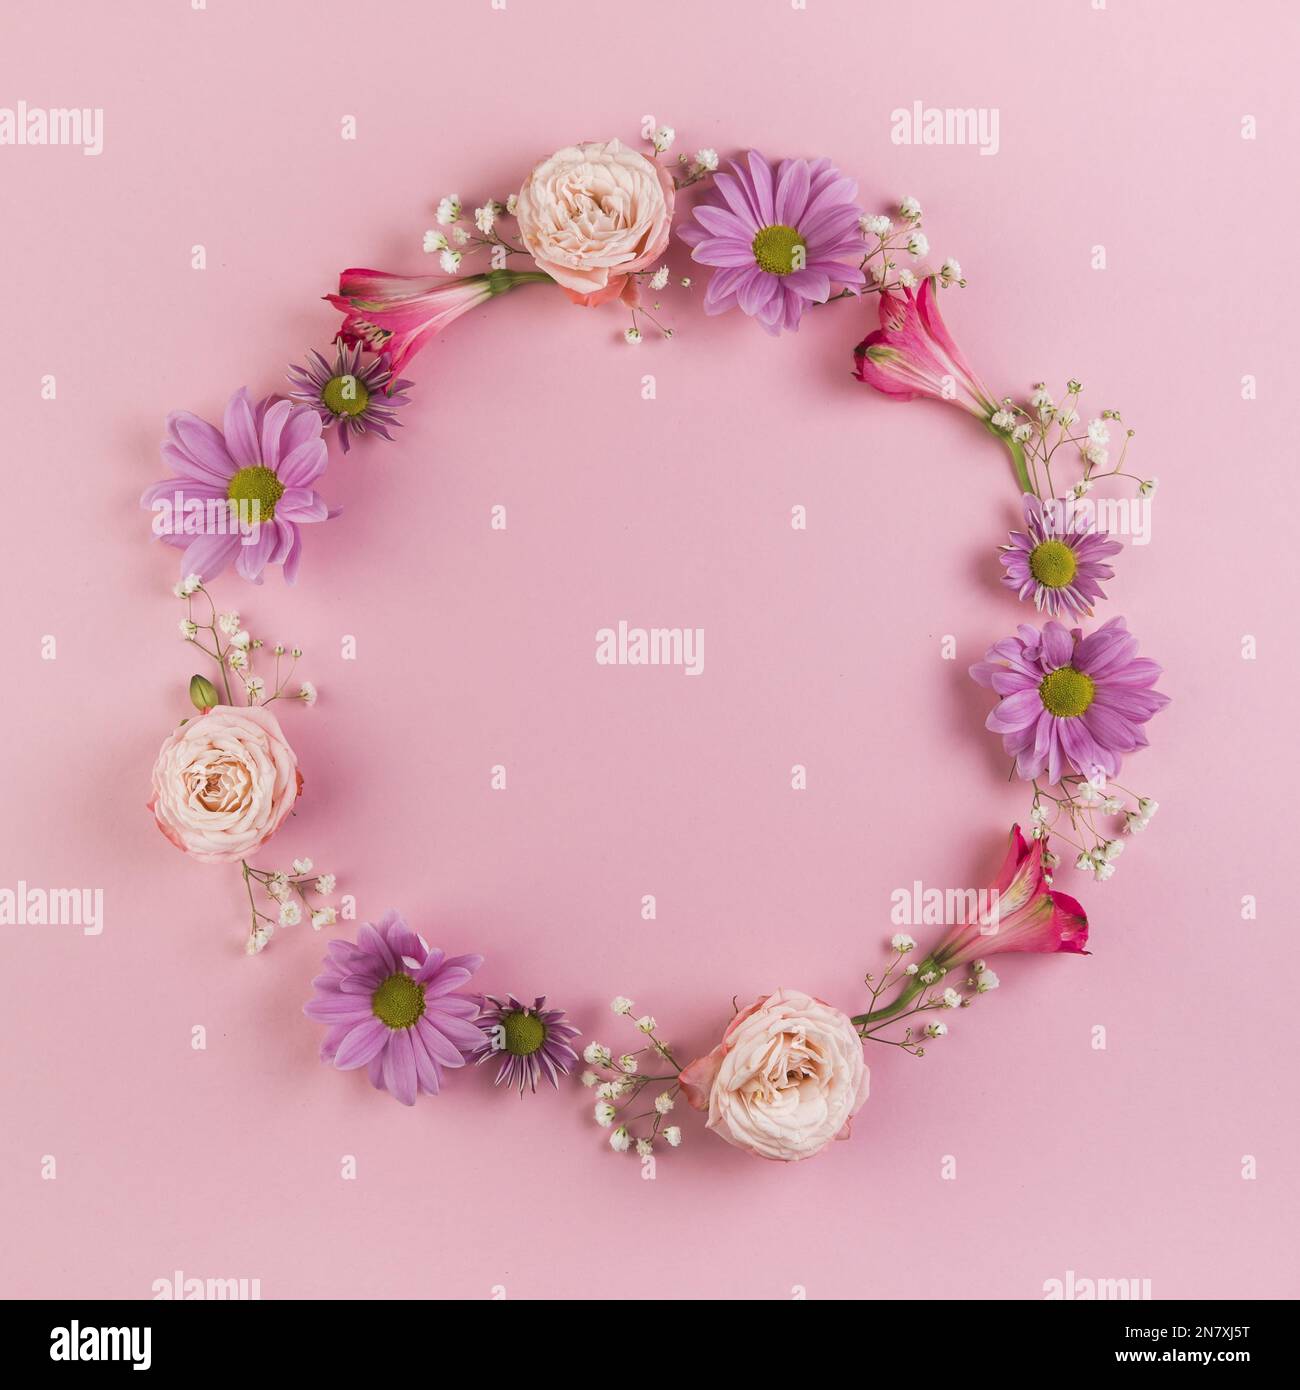 blank circular frame made with flowers pink background Stock Photo